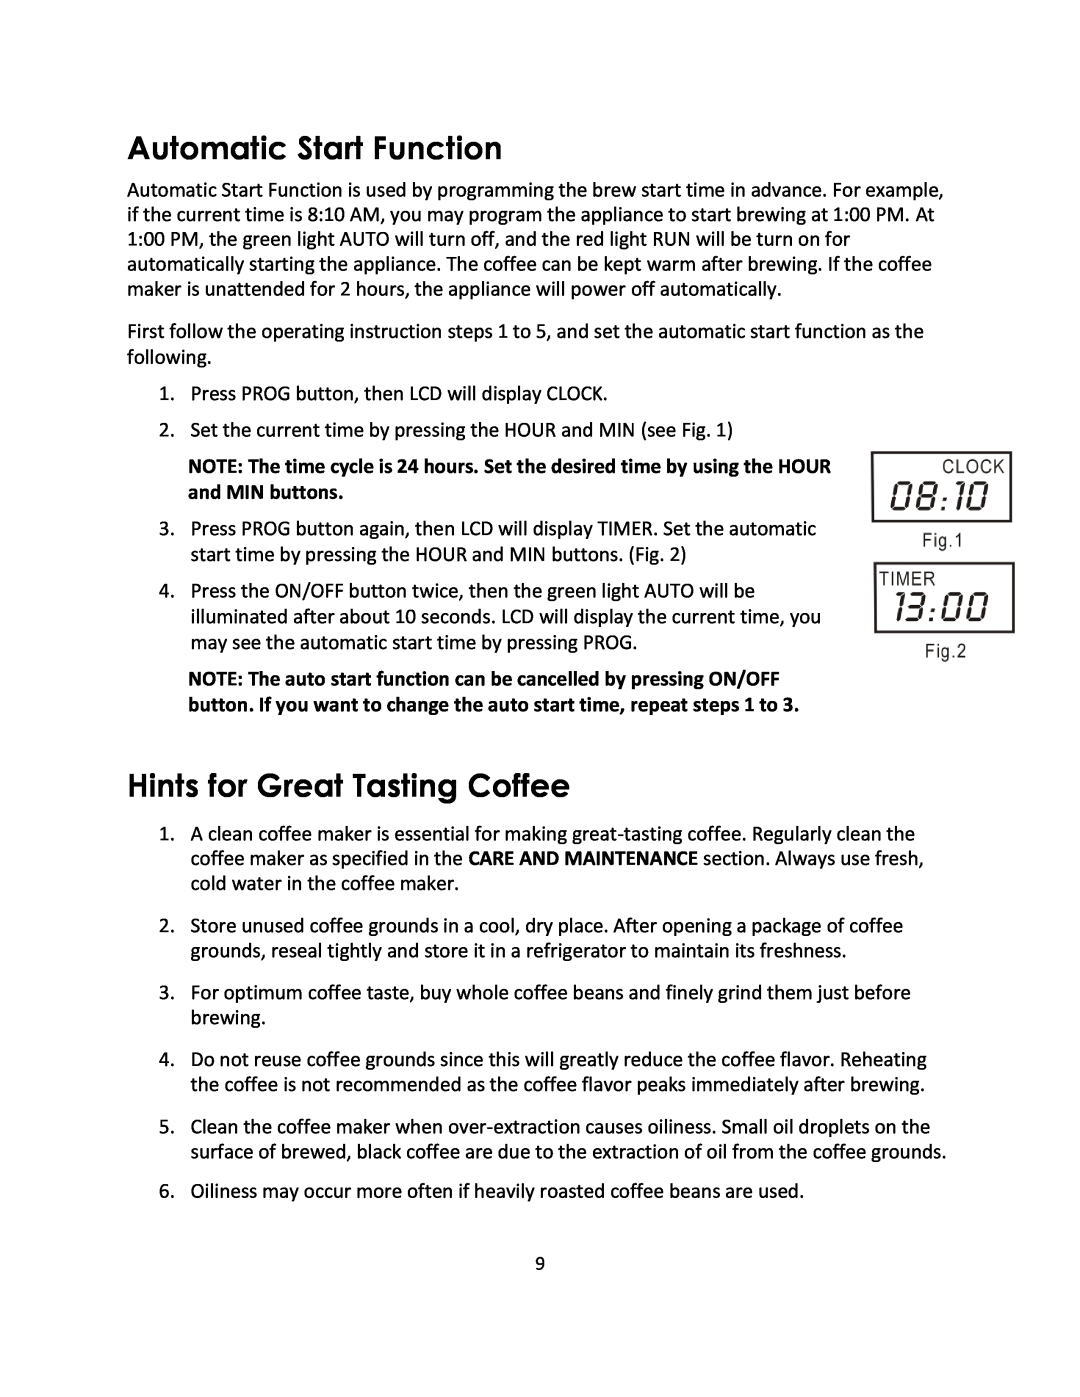 Magic Chef MCSCM12TB instruction manual Automatic Start Function, Hints for Great Tasting Coffee 